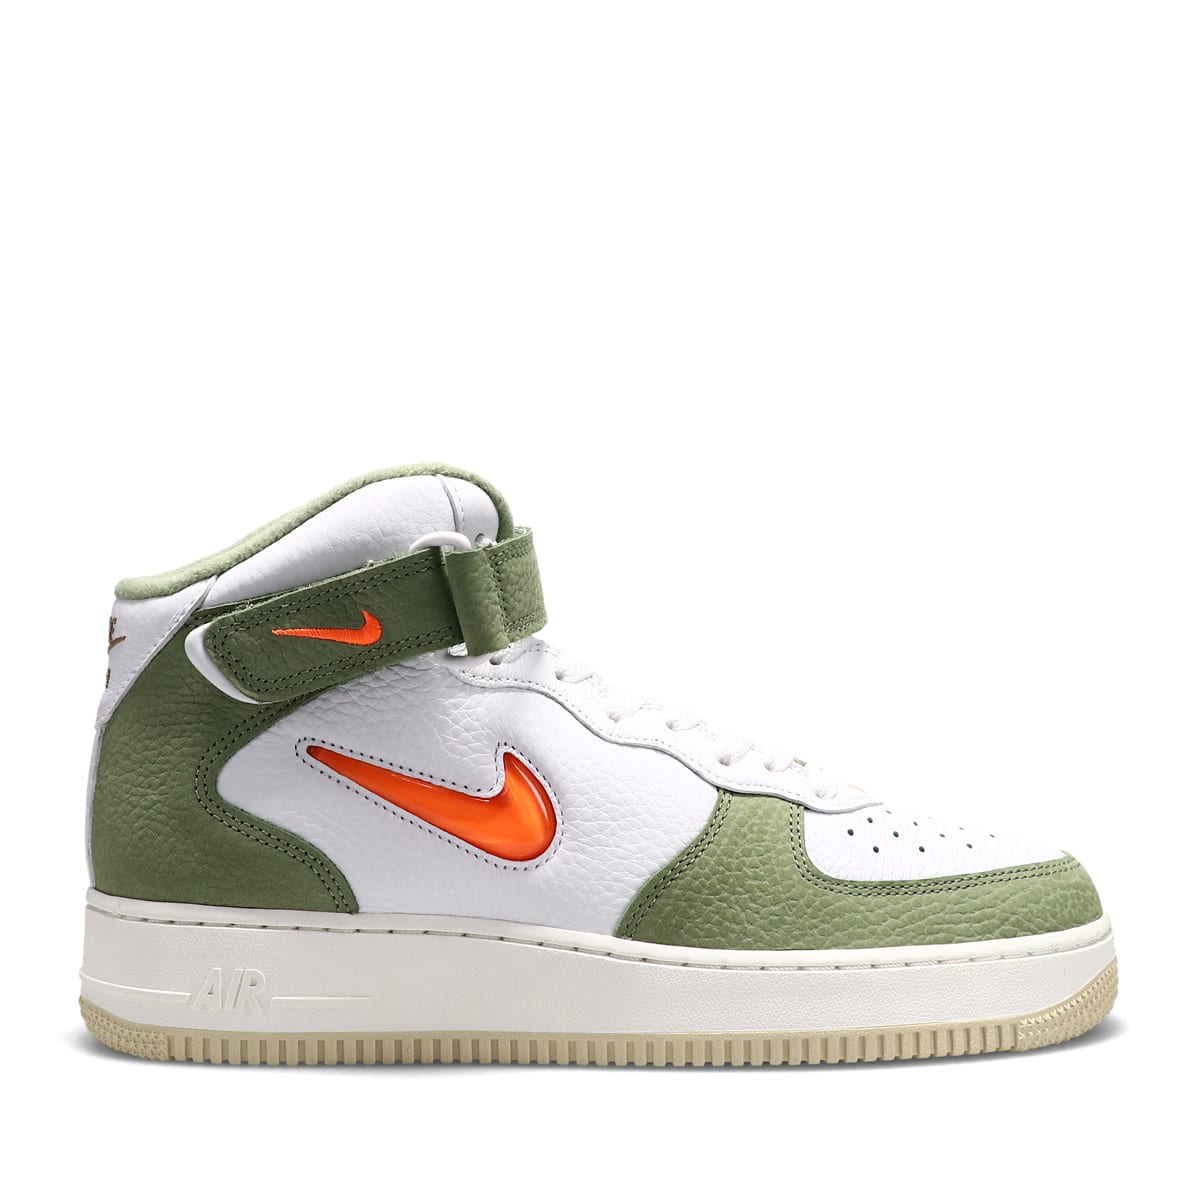 NIKE AIR FORCE 1 MID QS 22SU-S